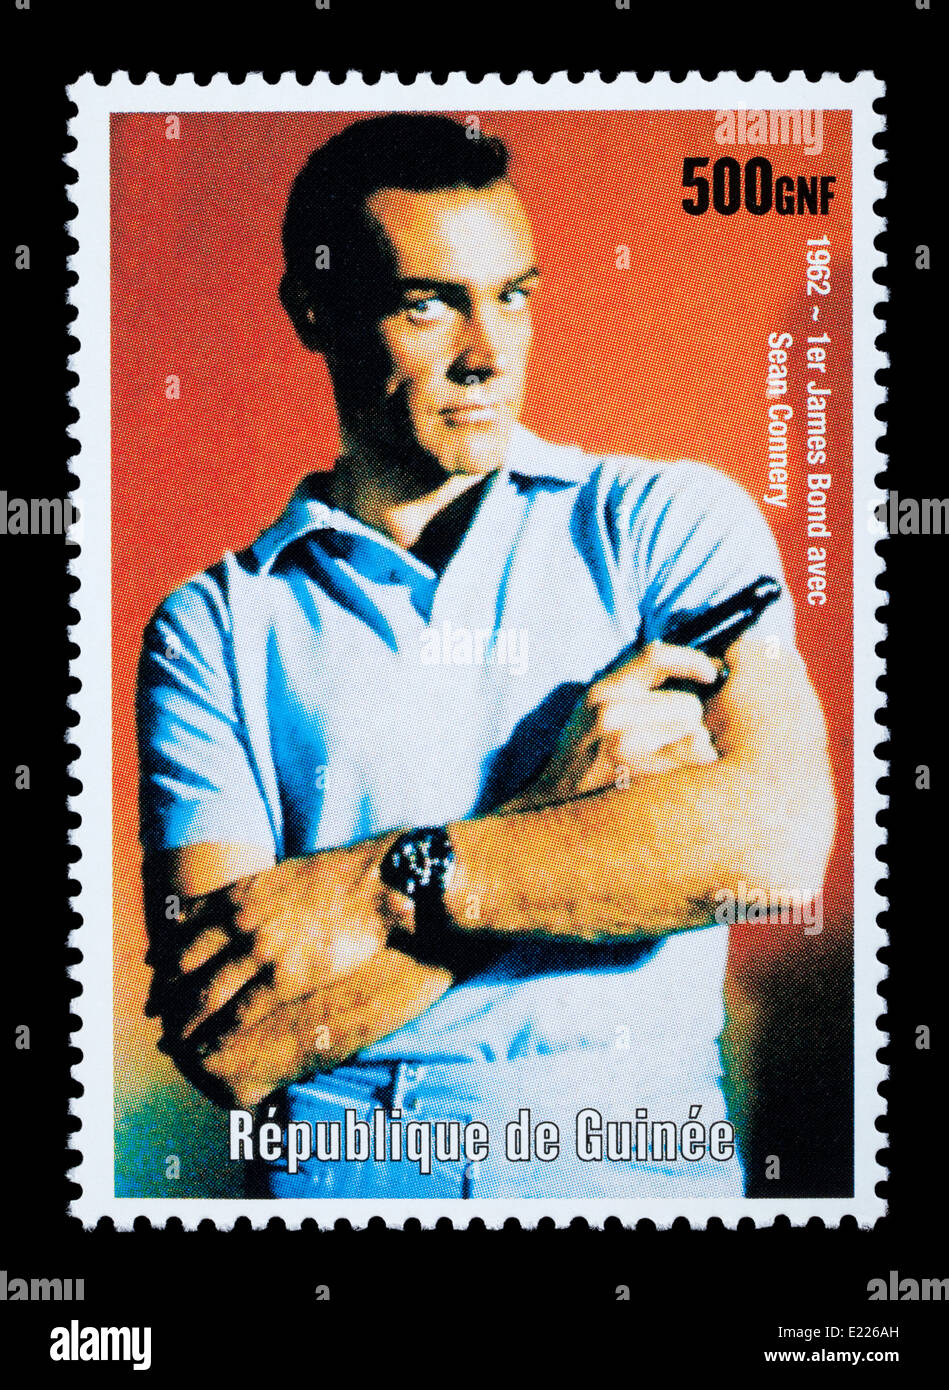 REPUBLIC OF GUINEA - CIRCA 2003: A postage stamp printed in the Republic of Guinea showing James Bond, circa 2003 Stock Photo